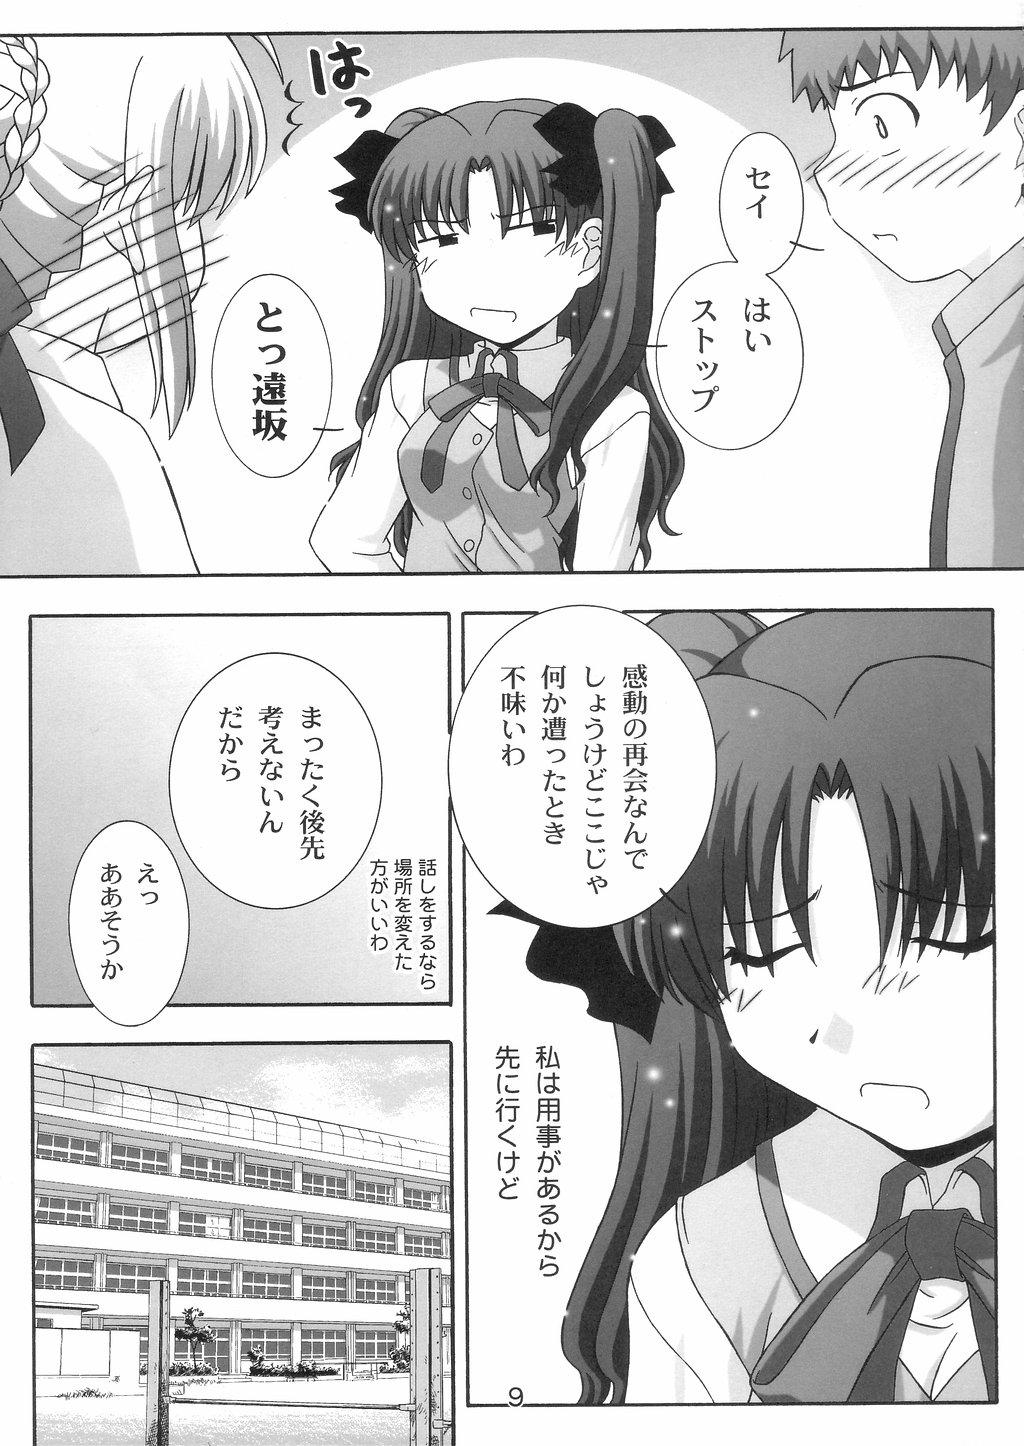 Old Vs Young Secret file next 10 - I feel my Fate - Fate stay night Mask - Page 8